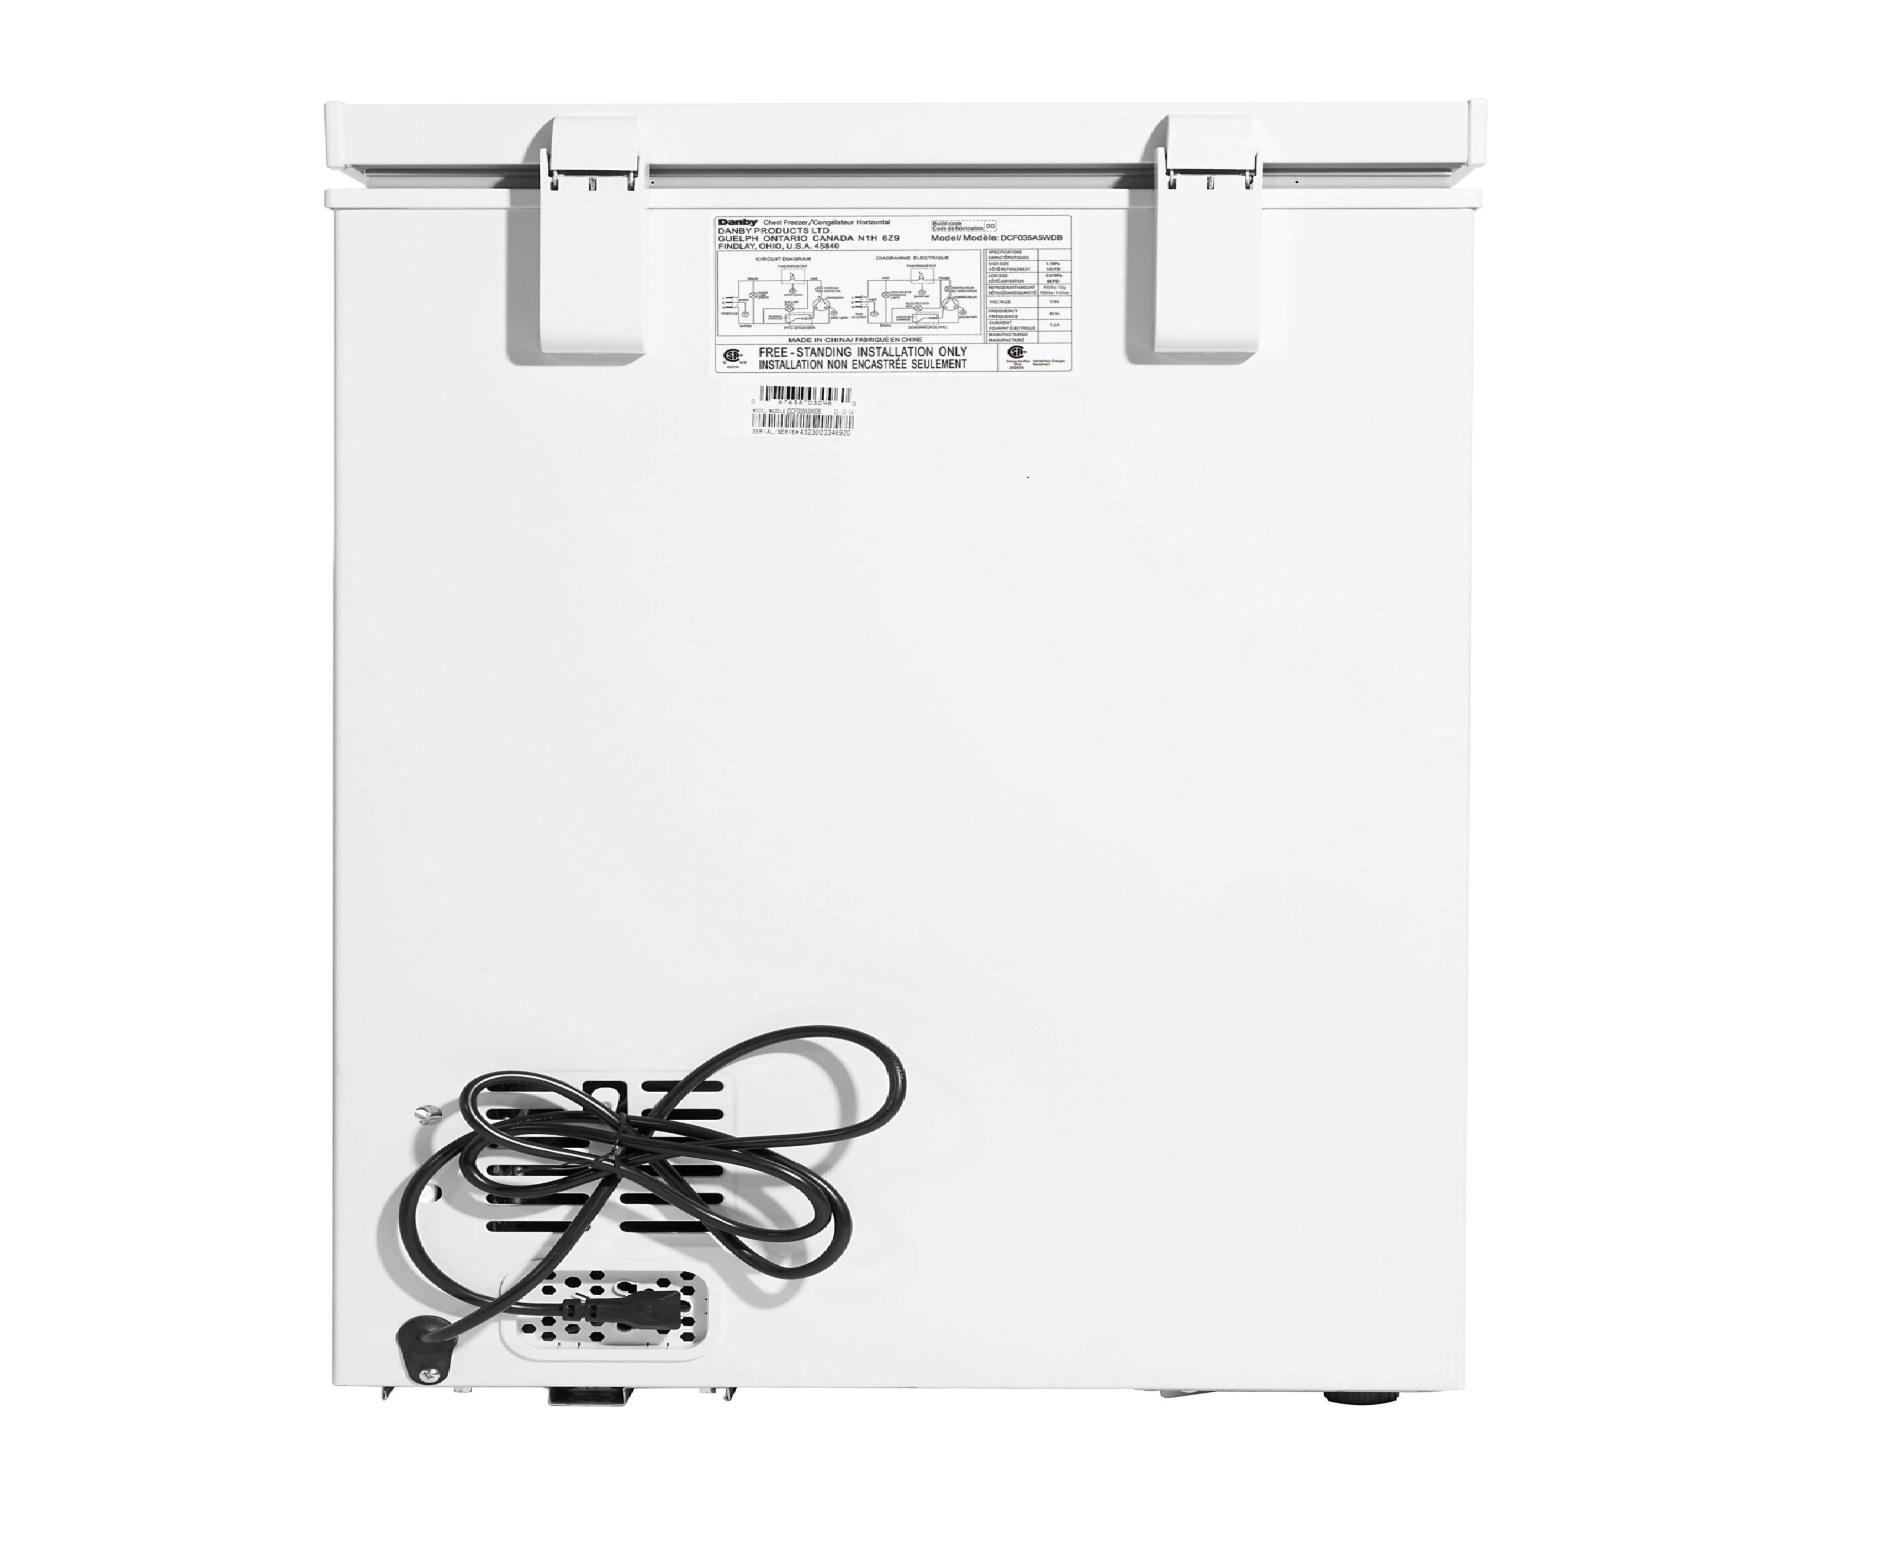 What Is The Typical Electrical Cord Length On A Chest Freezer